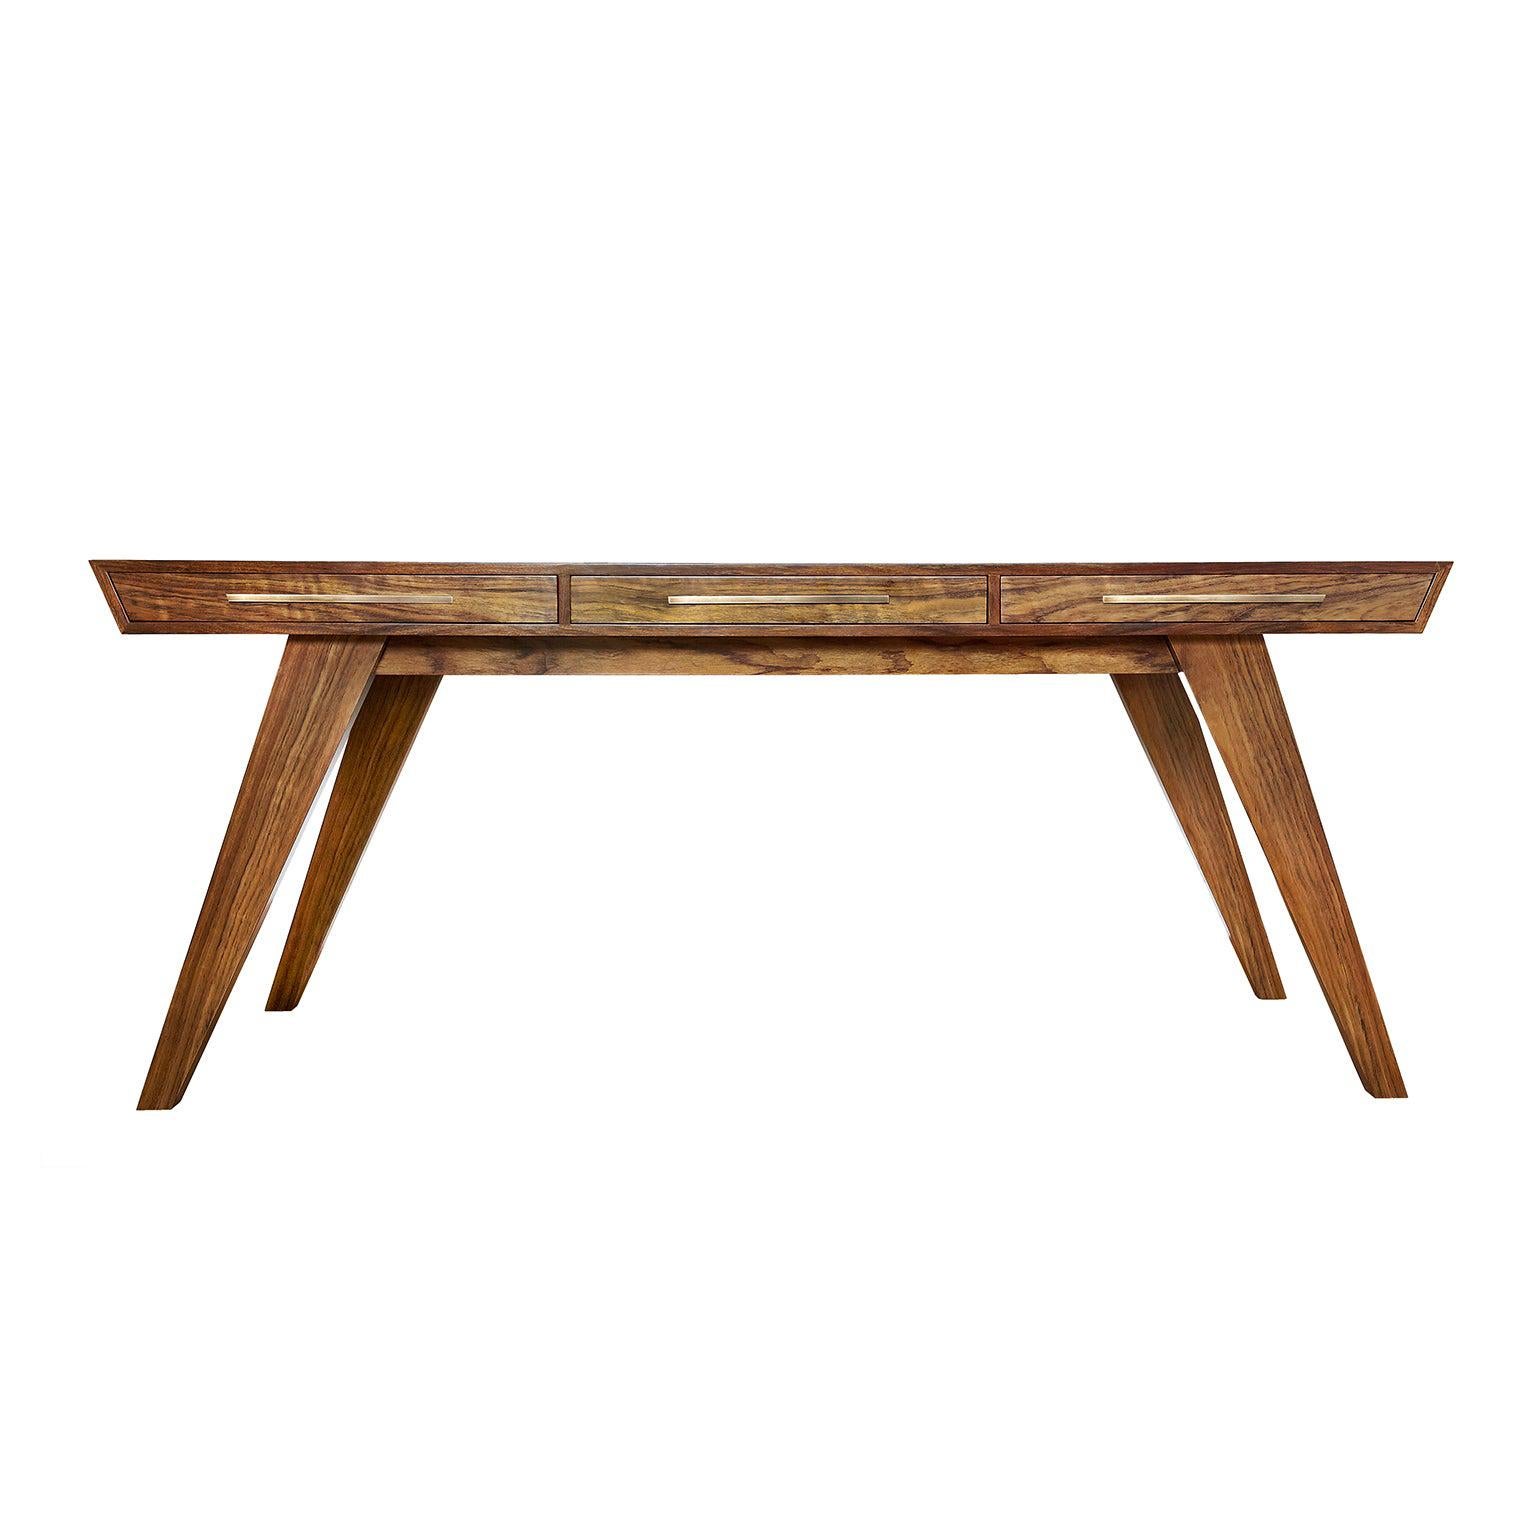 Contemporary Handcrafted Desk "Timaios" in Wood, with Inclined Legs by Anaktae